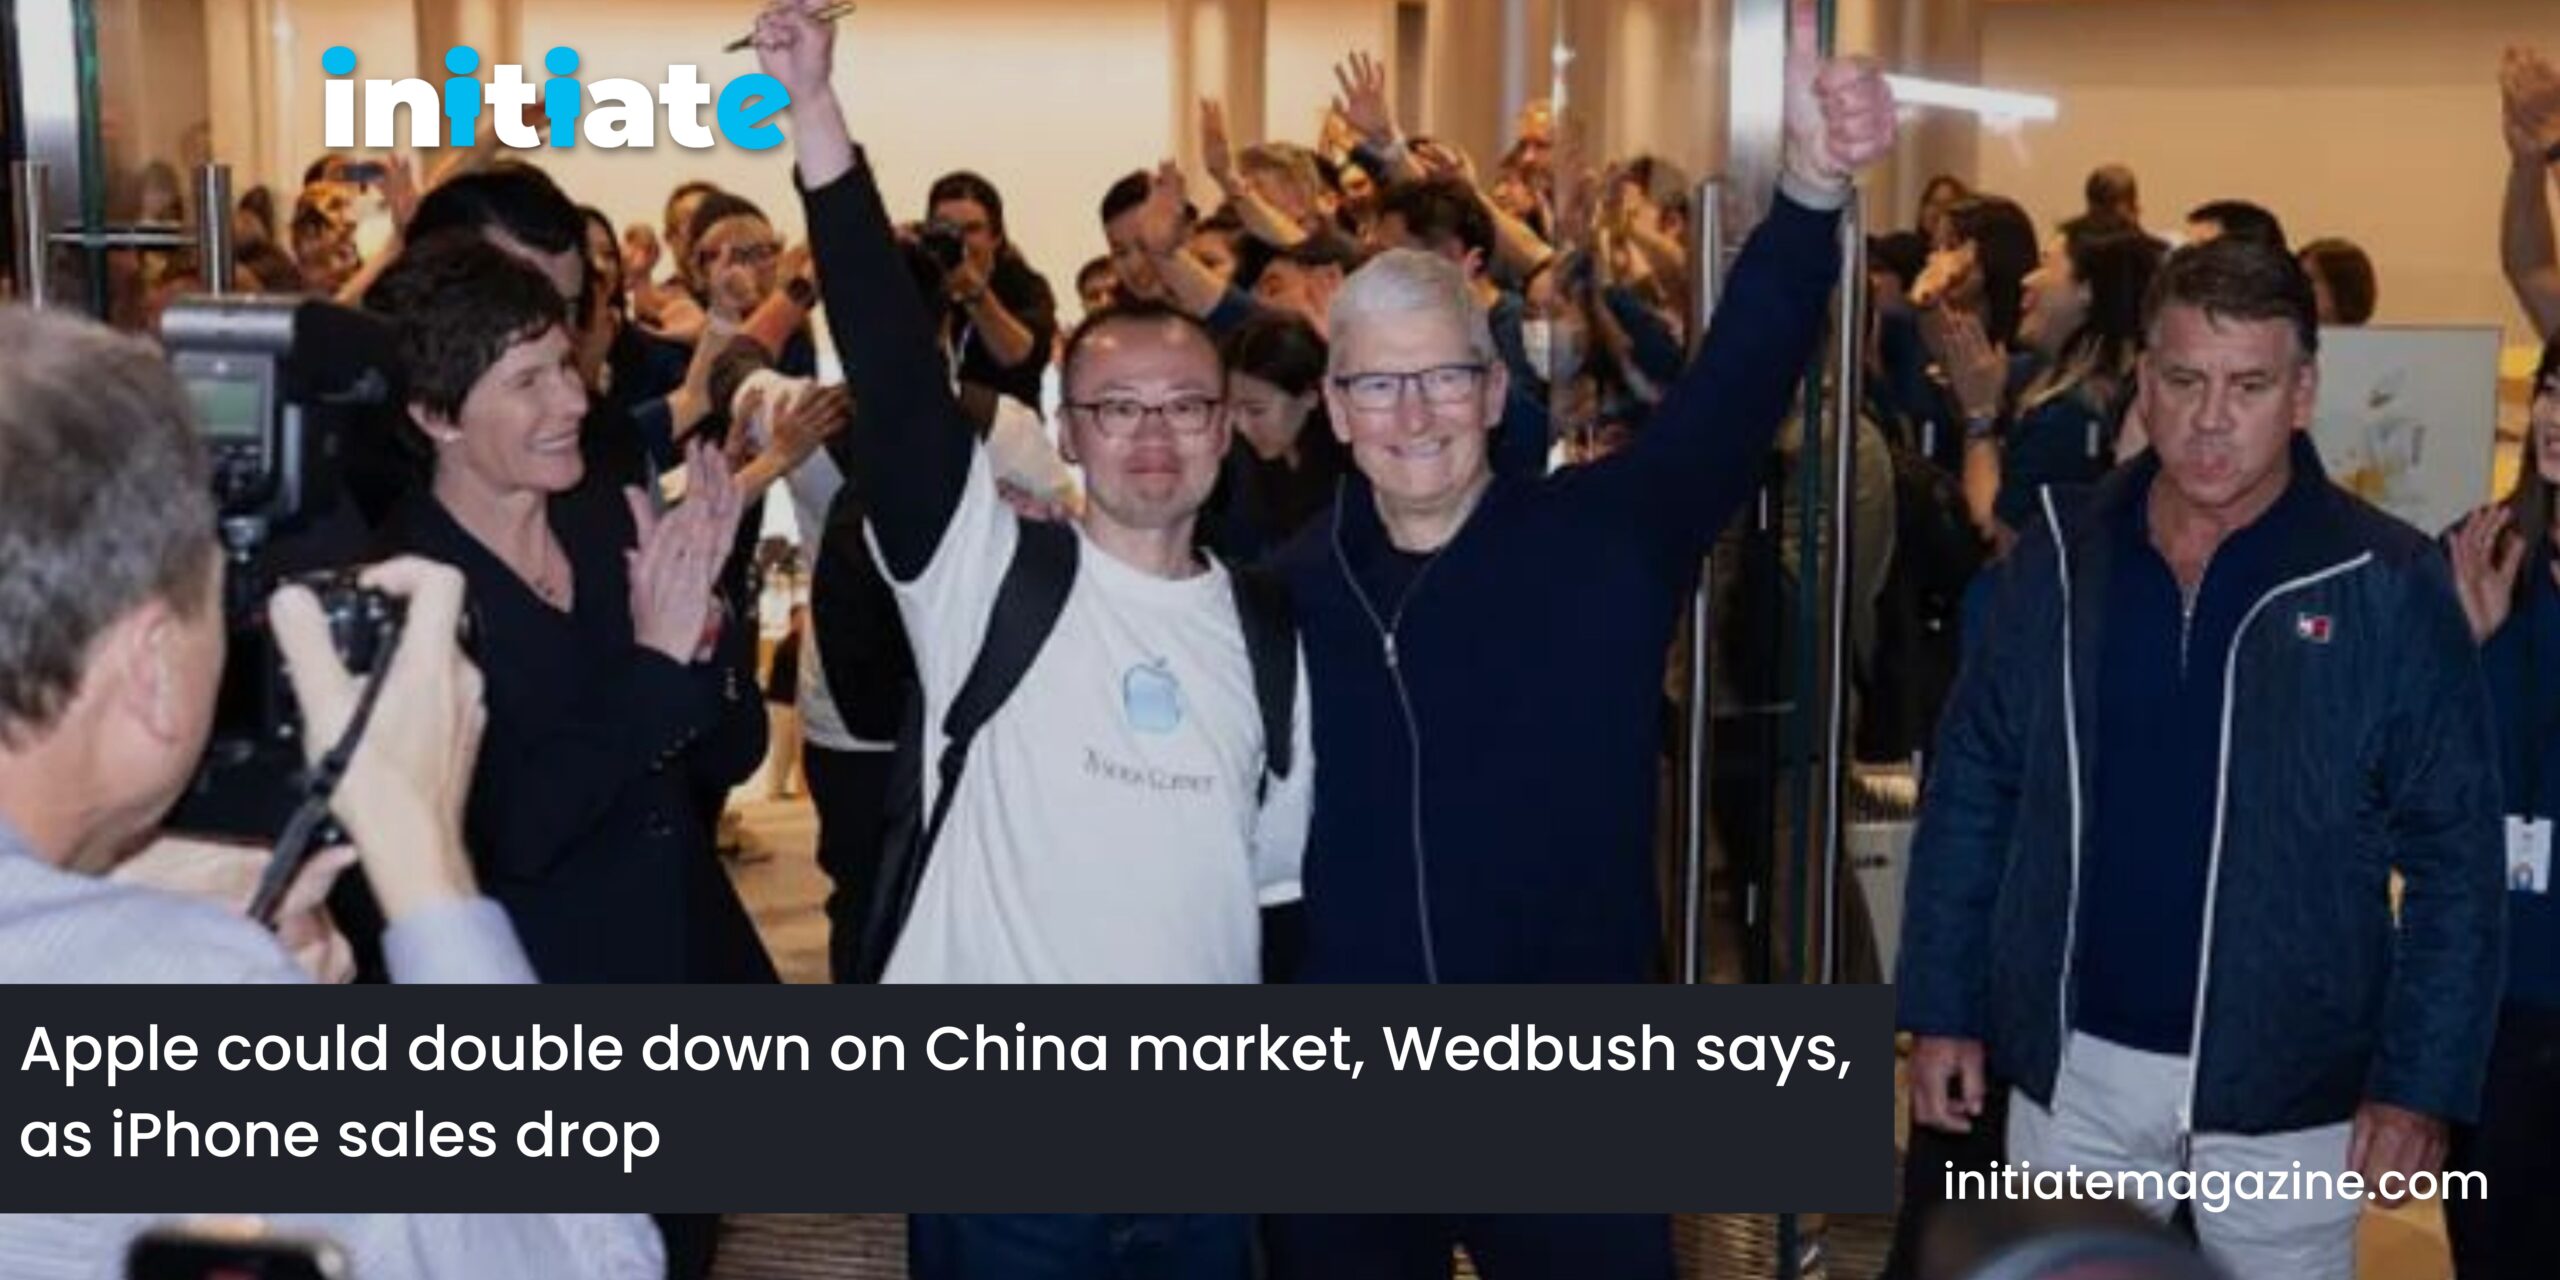 Apple could double down on China market, Wedbush says, as iPhone sales drop